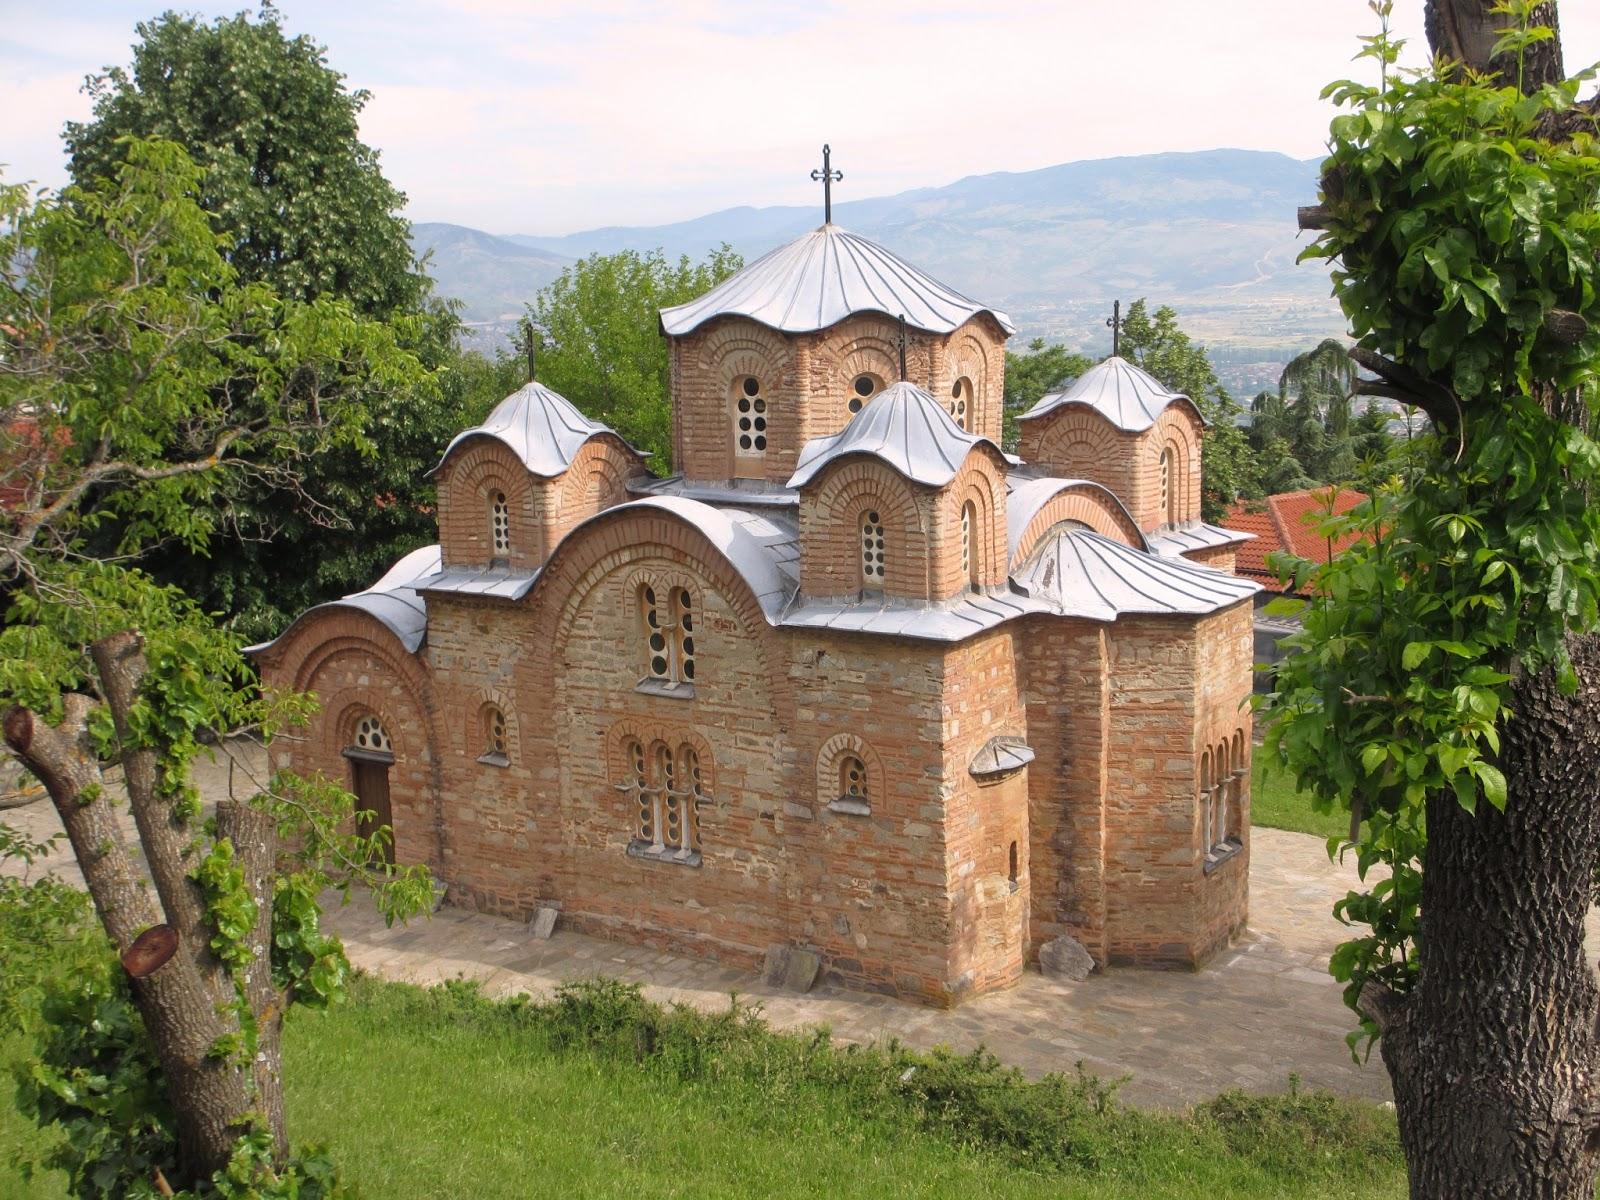 Cover image of this place Црква Св. Пантелејмон / Church of St. Panteleimon